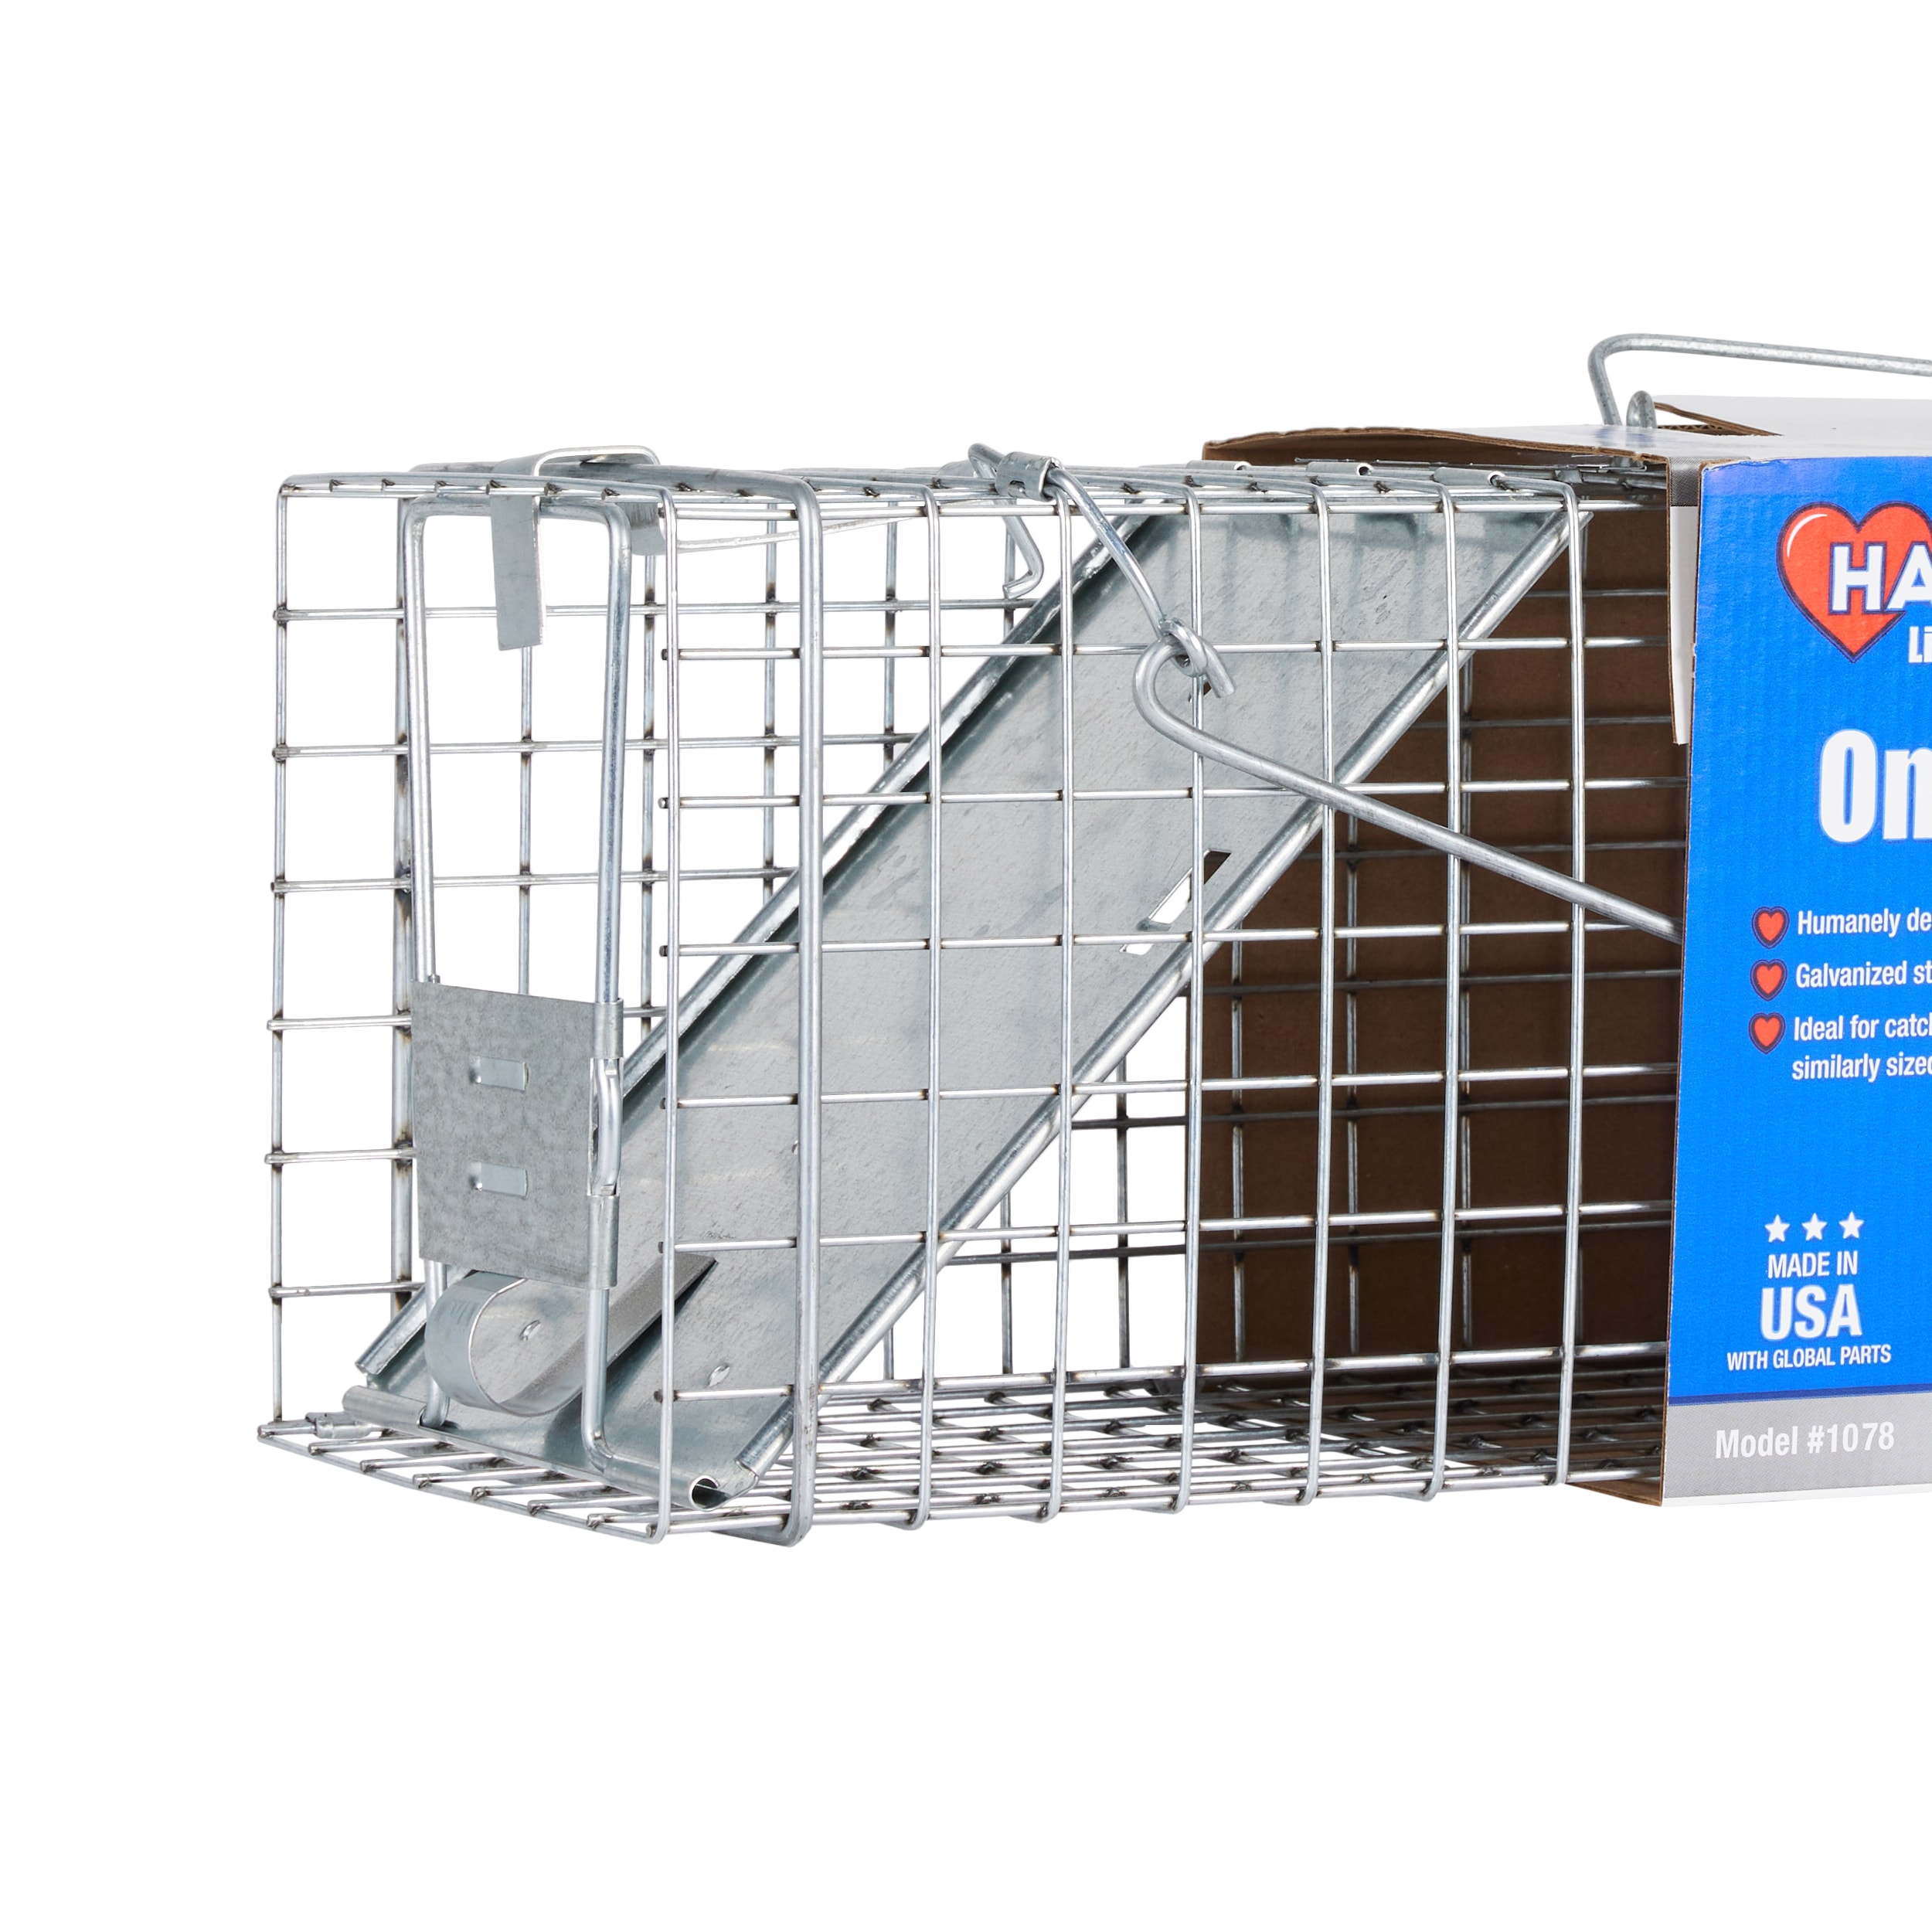 Havahart 1078 24 In., X 7 In., X 7 In., Pro Cage Animal Hunting Cage Traps  